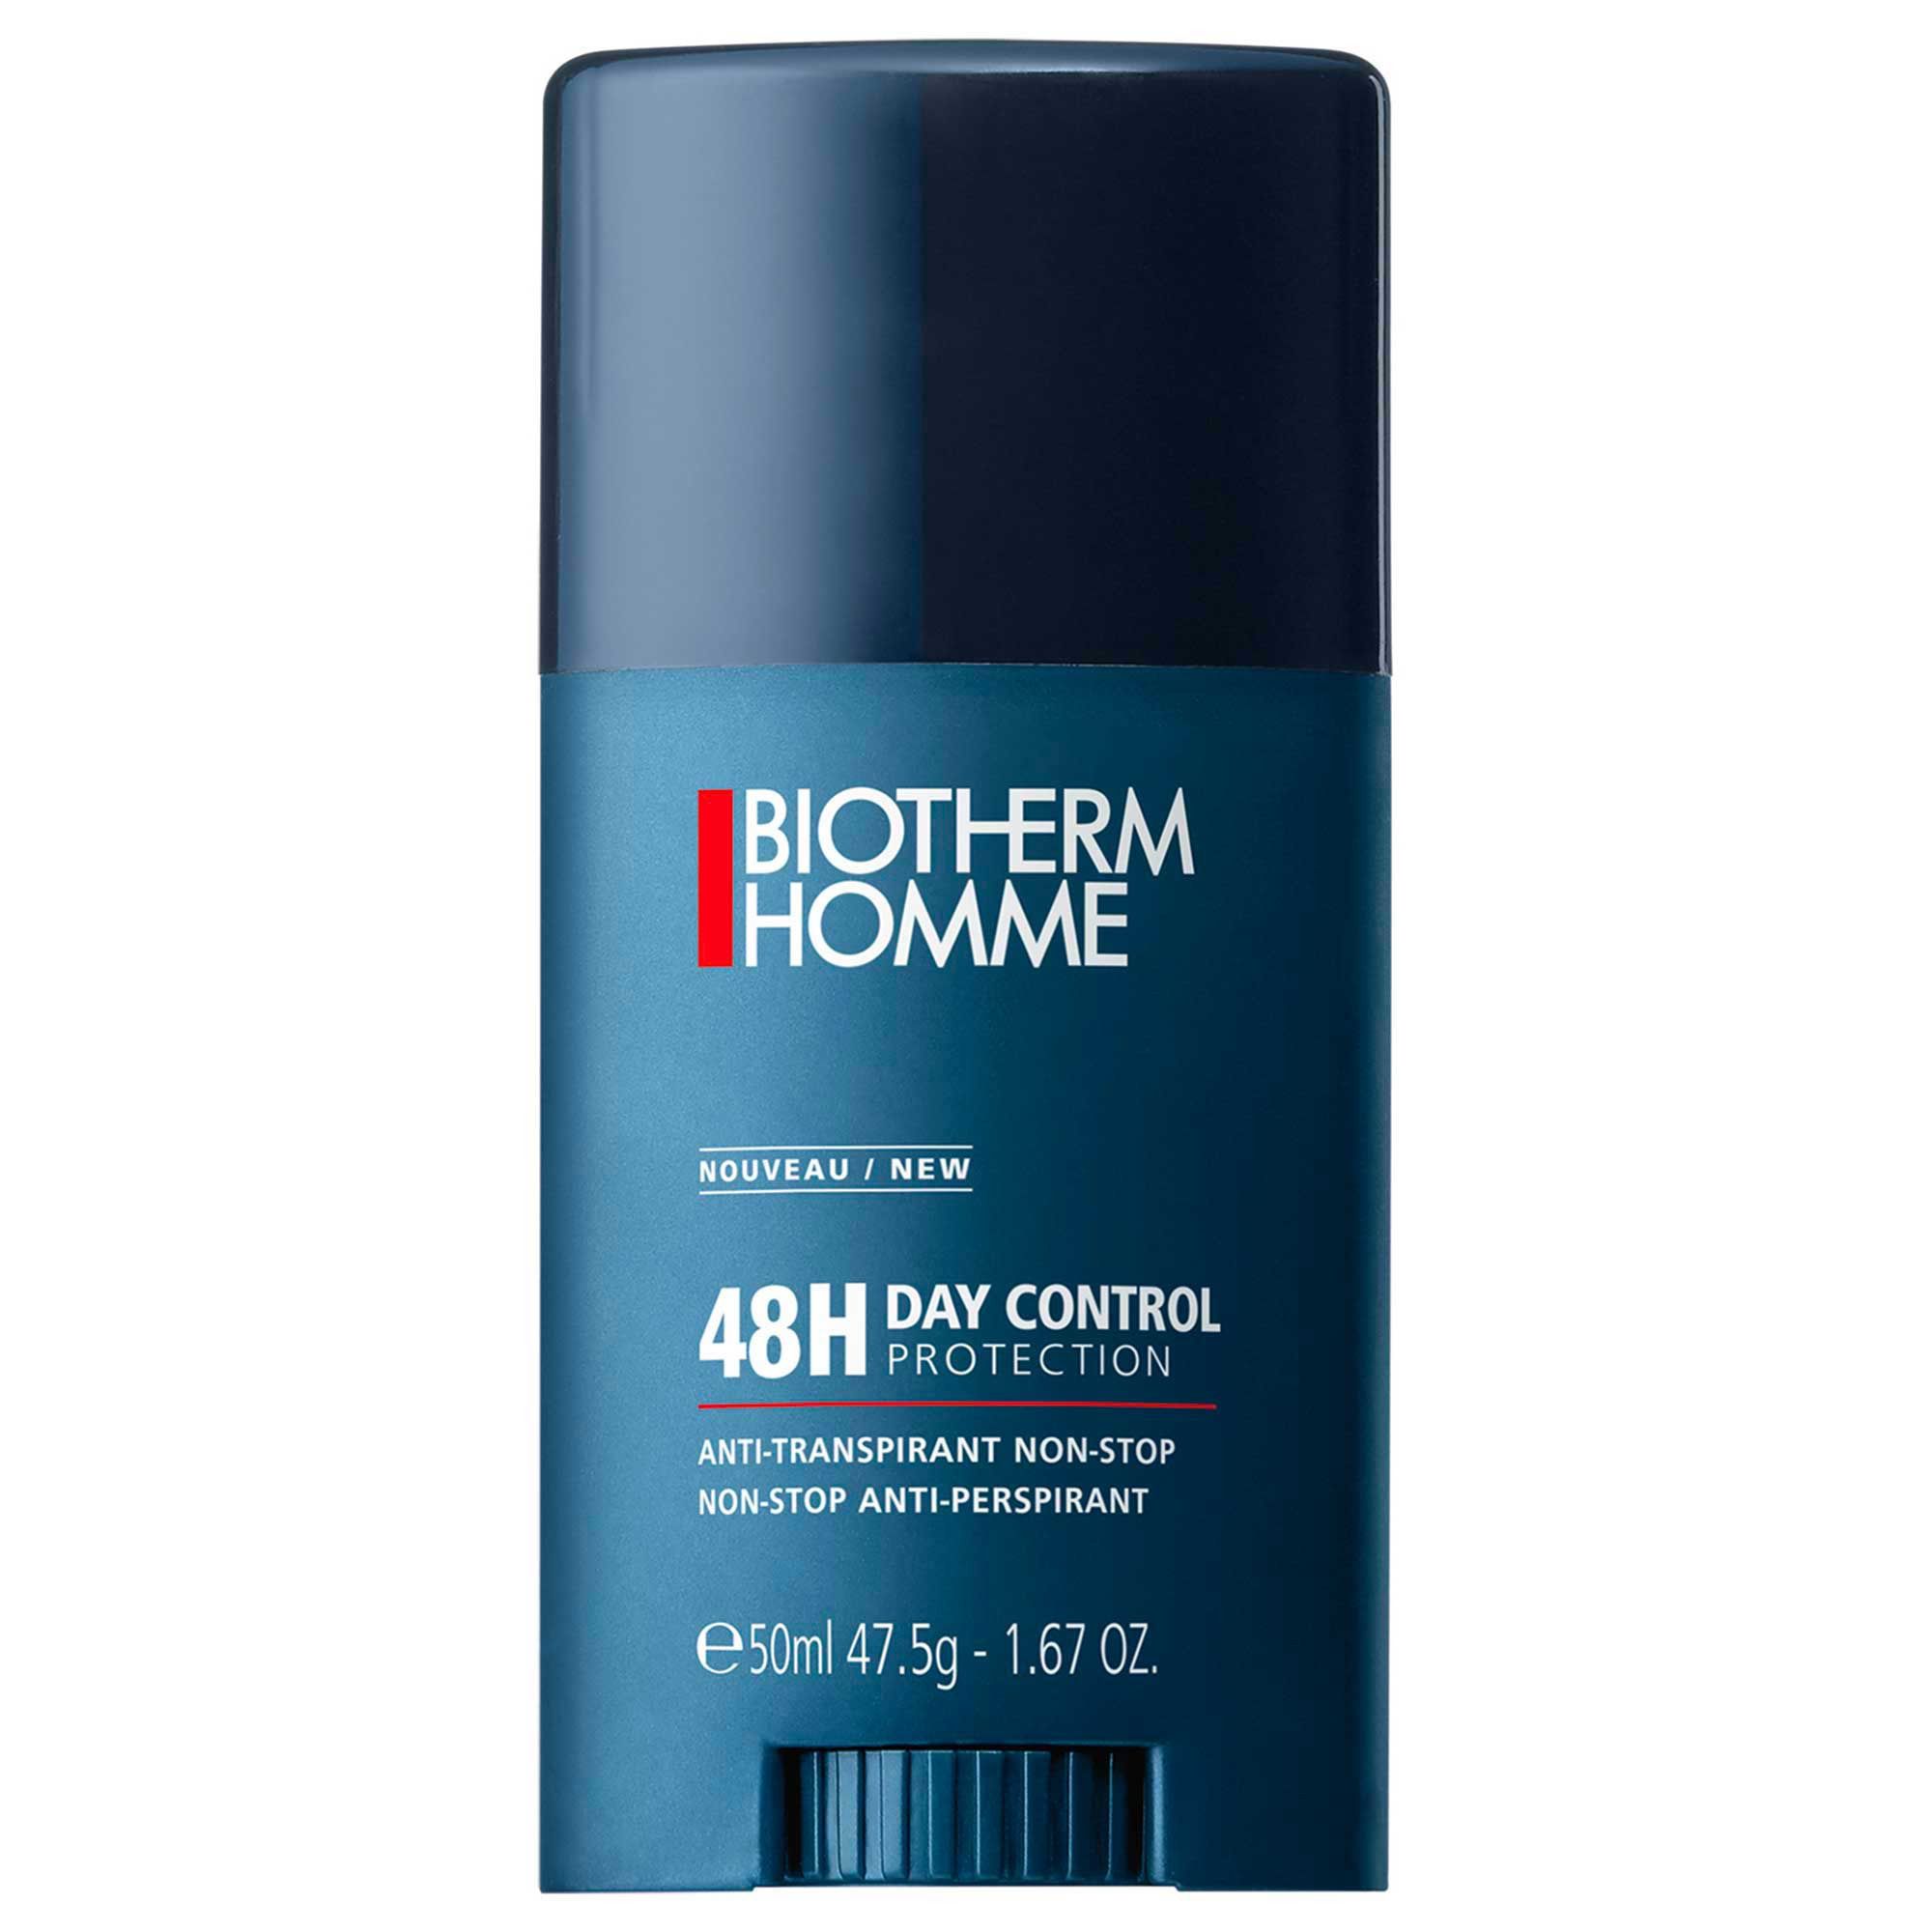 Biotherm Homme 48H Day Control - Protection